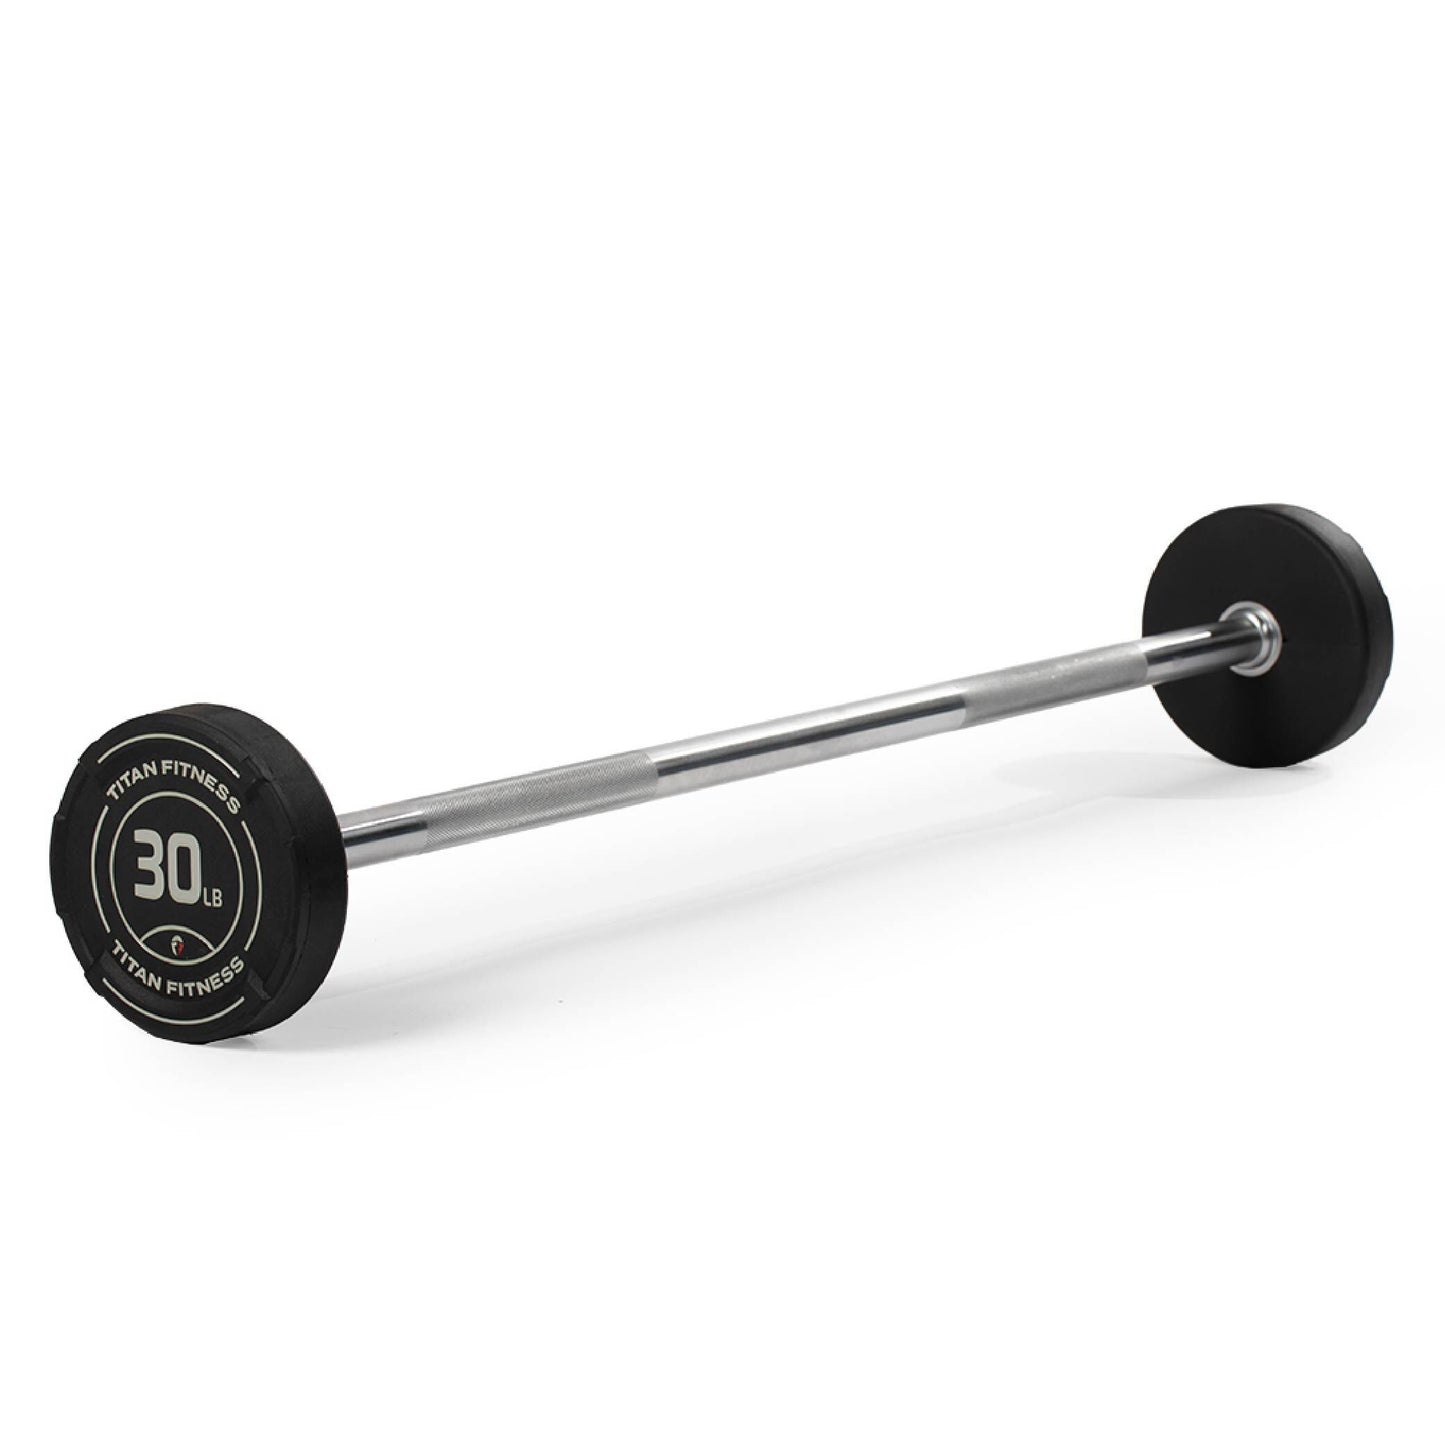 30 LB Straight Fixed Rubber Barbell - view 1